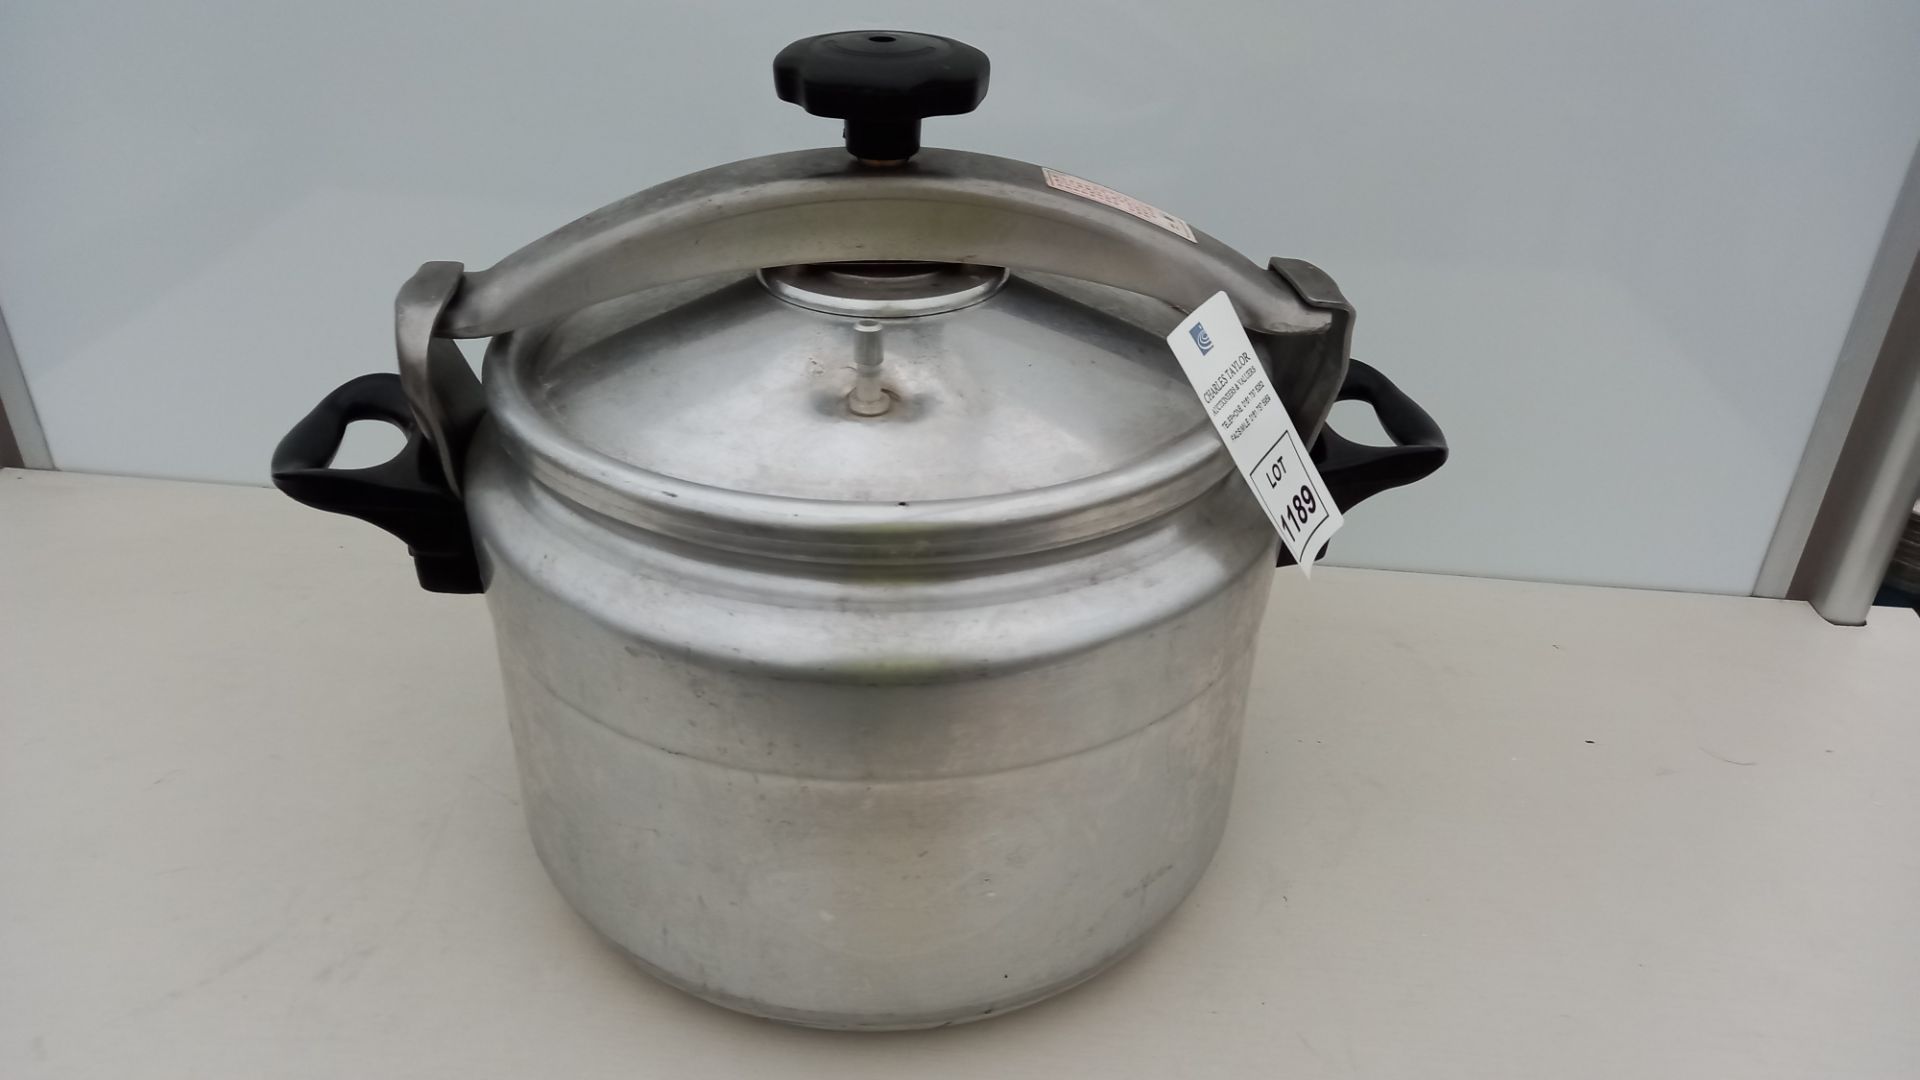 COMMERCIAL STEAM PRESSURE COOKER